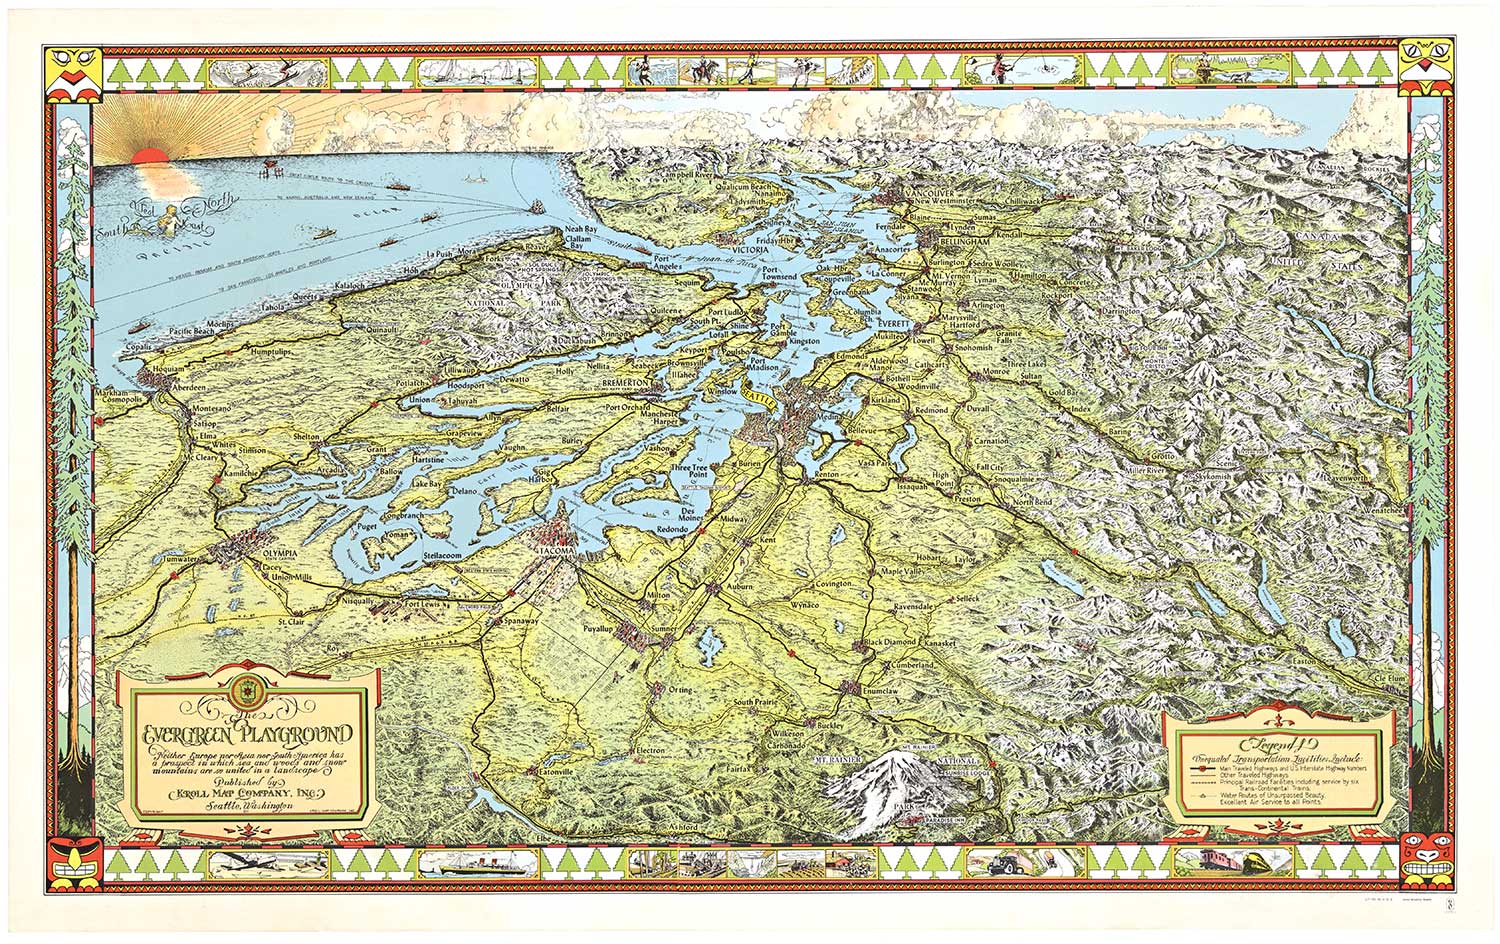 Original The Evergreen Playground Kroll Map Company vintage poster. Archival linen backed in fine condition. A- condition with only 1 small repair on the outter border in the white area. No tears nor stains. <br> <br>This map was originally drawn du